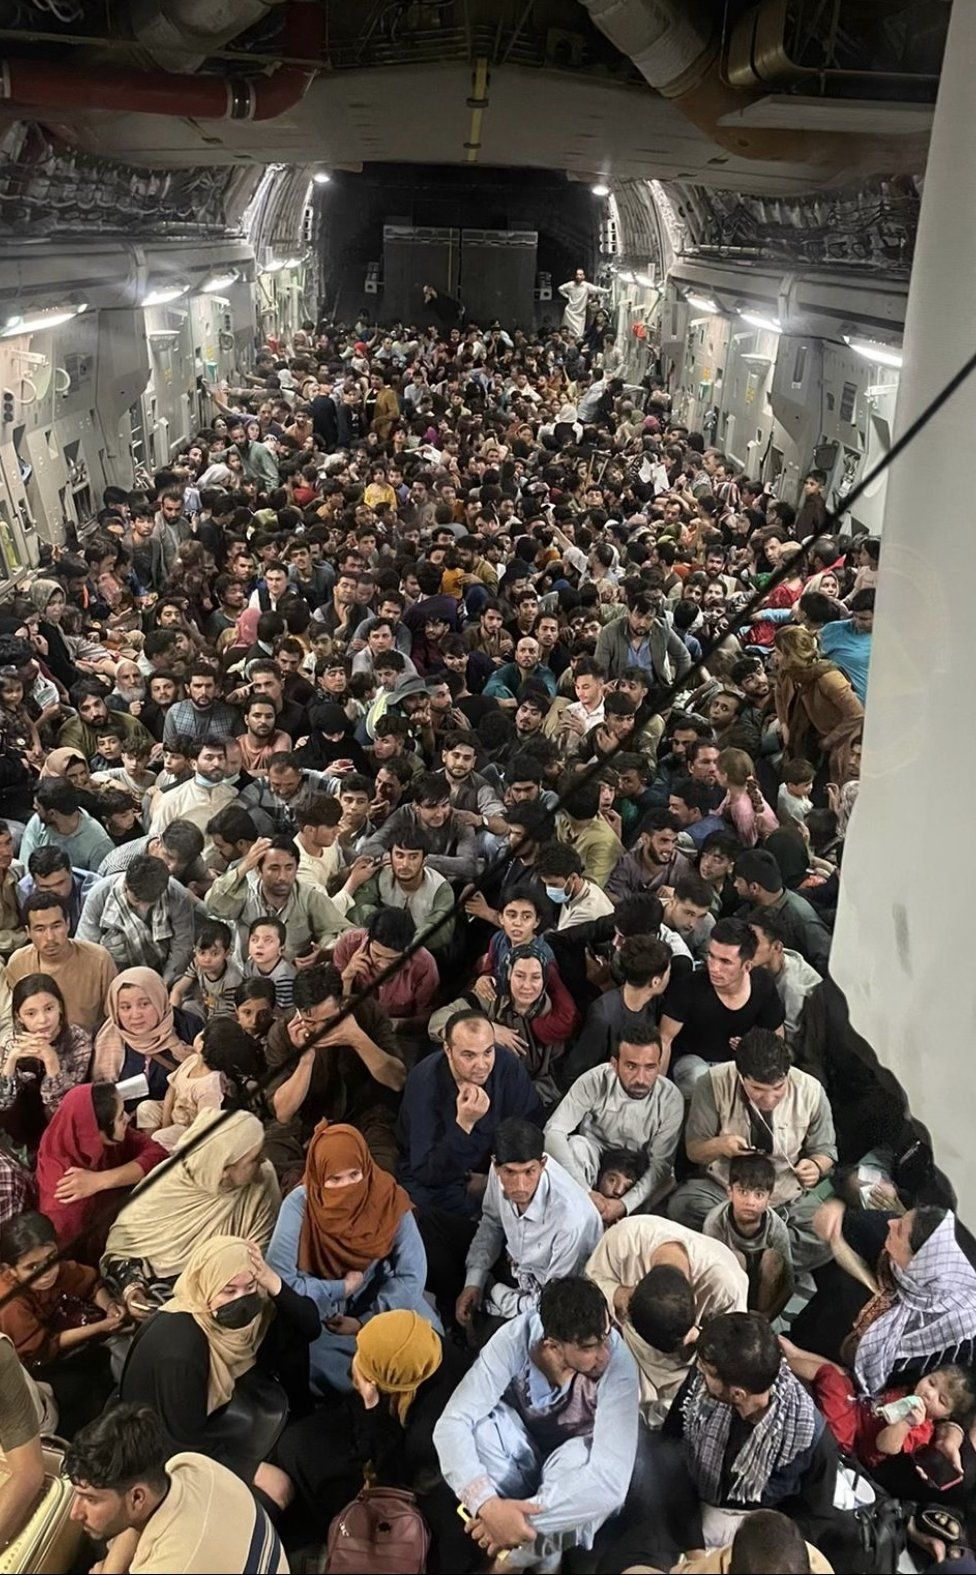 Picture provided by the US Air Mobility Command appears to show hundreds of Afghans fleeing Kabul onboard an American C-17 cargo plane, 15 August 2021